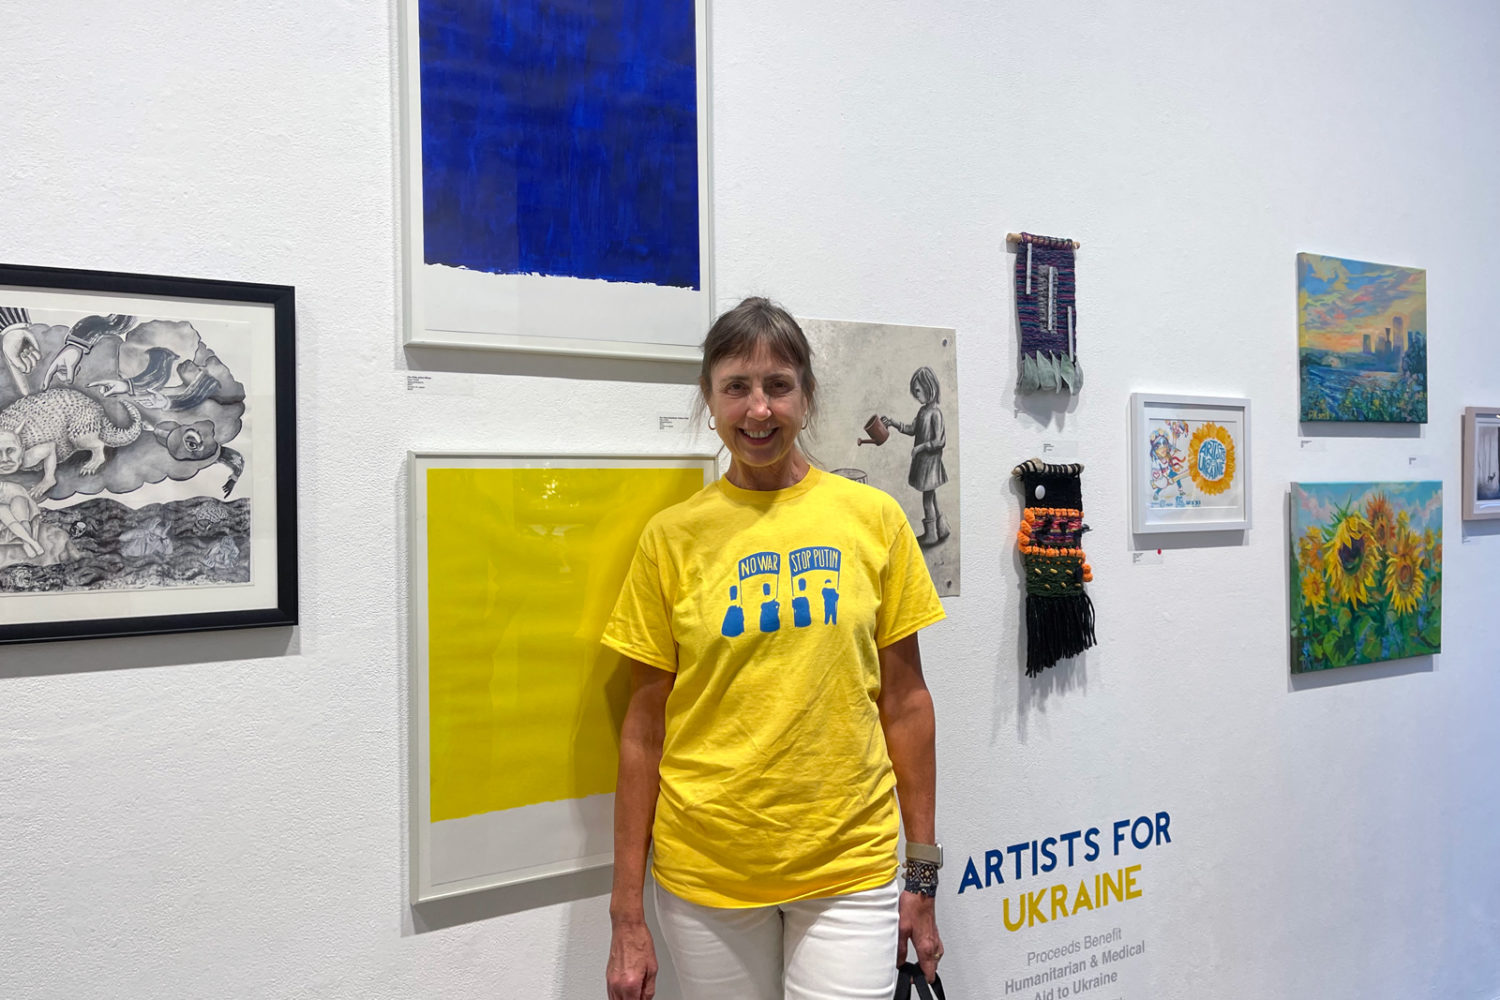 Olga in front of my two  contributions to "Artists For Ukraine" show at Rochester Contemporary